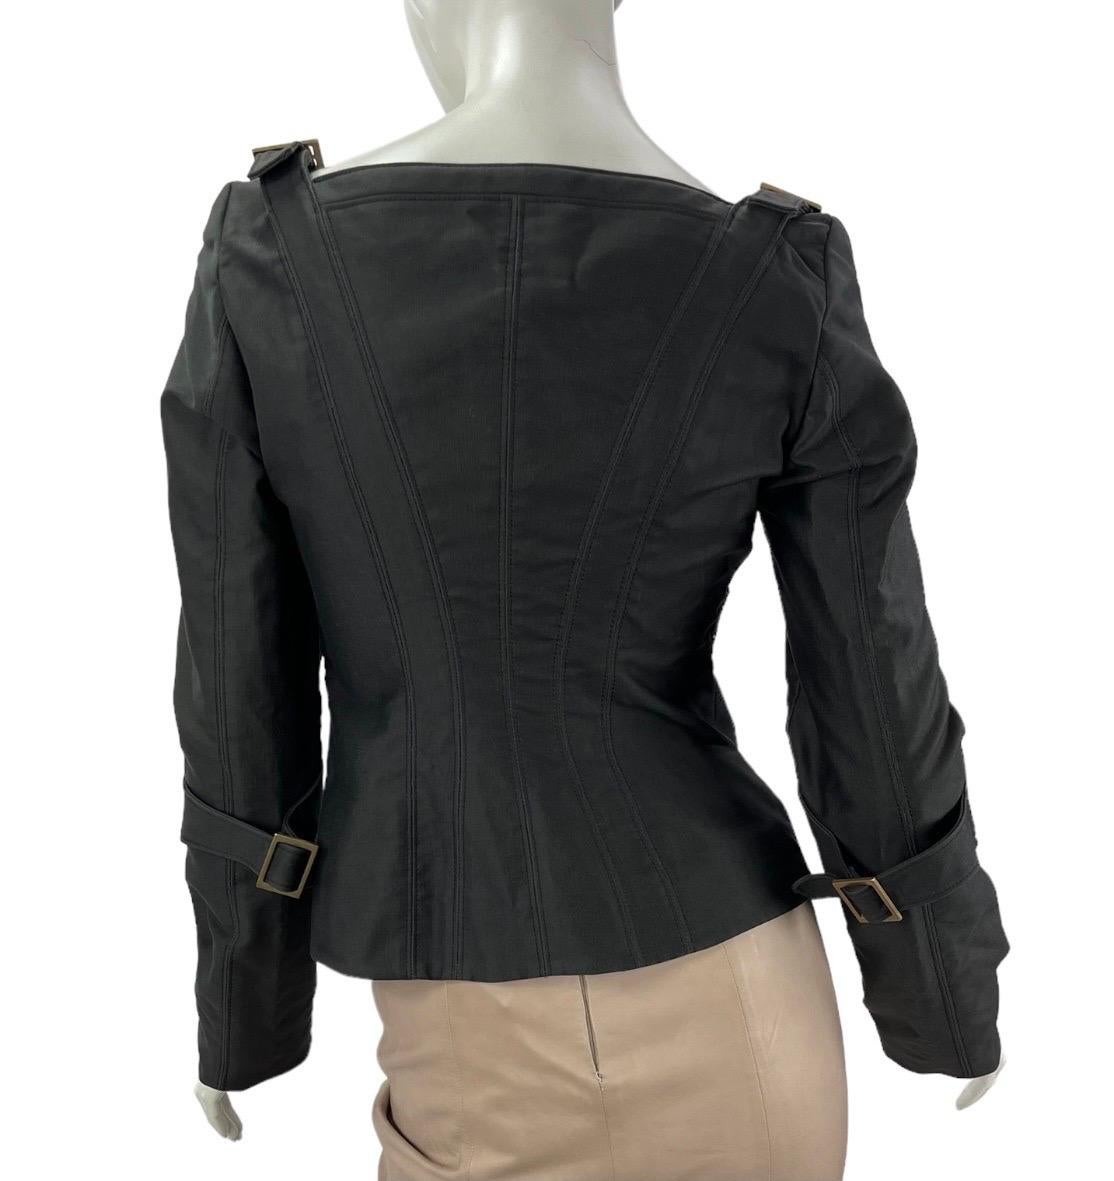 2003 Vintage Tom Ford for Gucci Chocolate Brown Corset Jacket Italian 40 US 4 In New Condition For Sale In Montgomery, TX